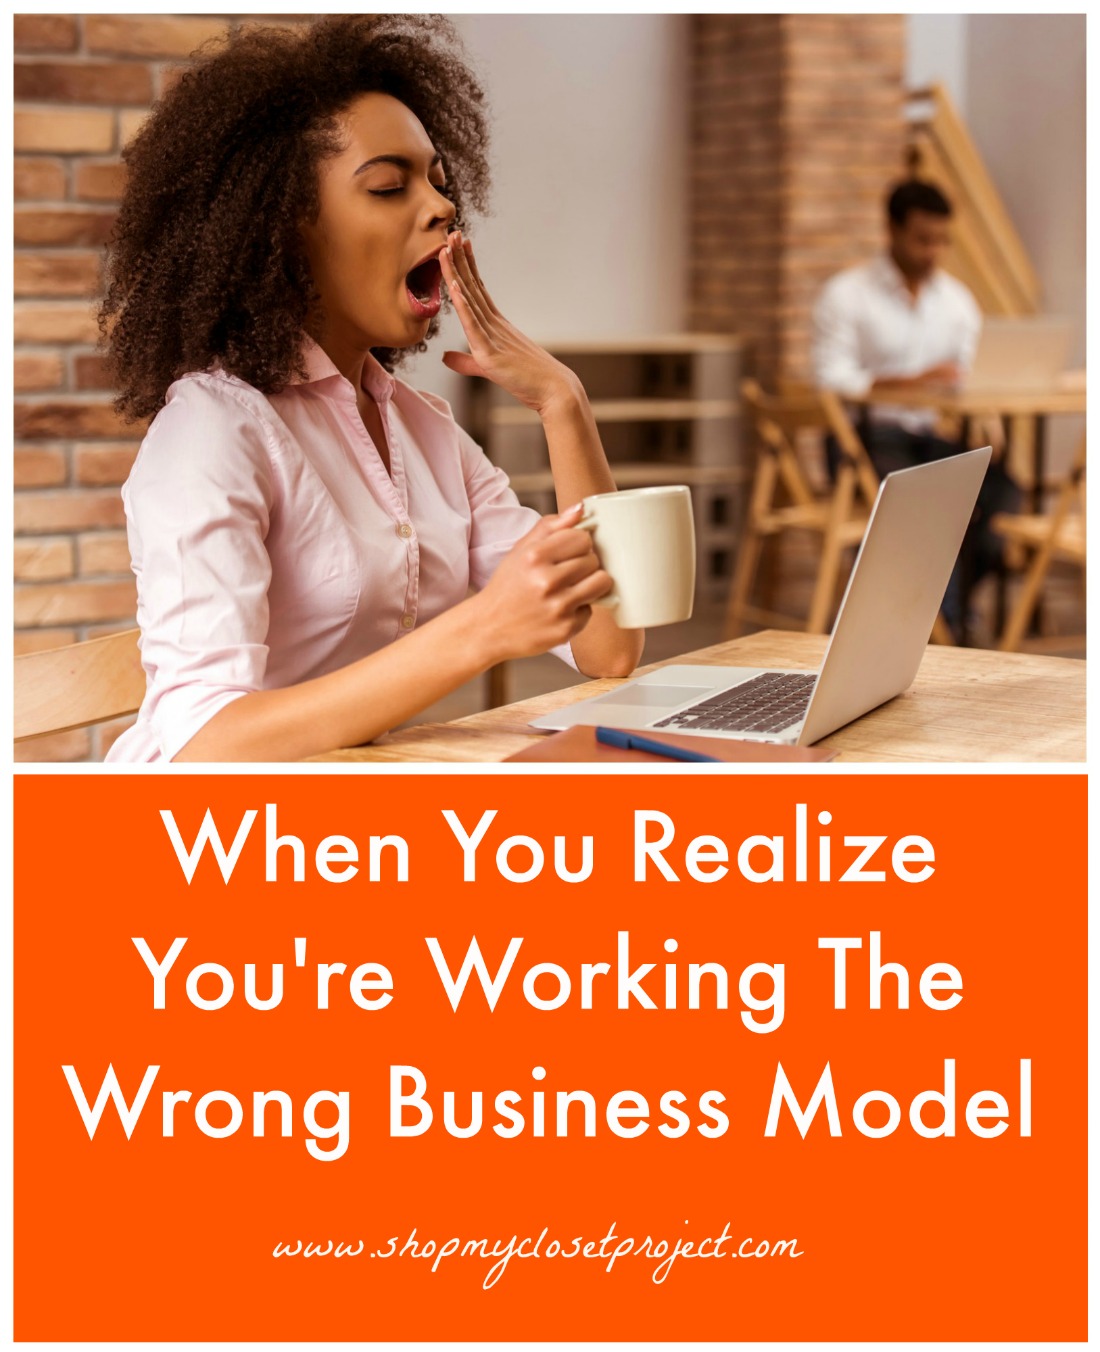 When You Realize You’re Working The Wrong Business Model